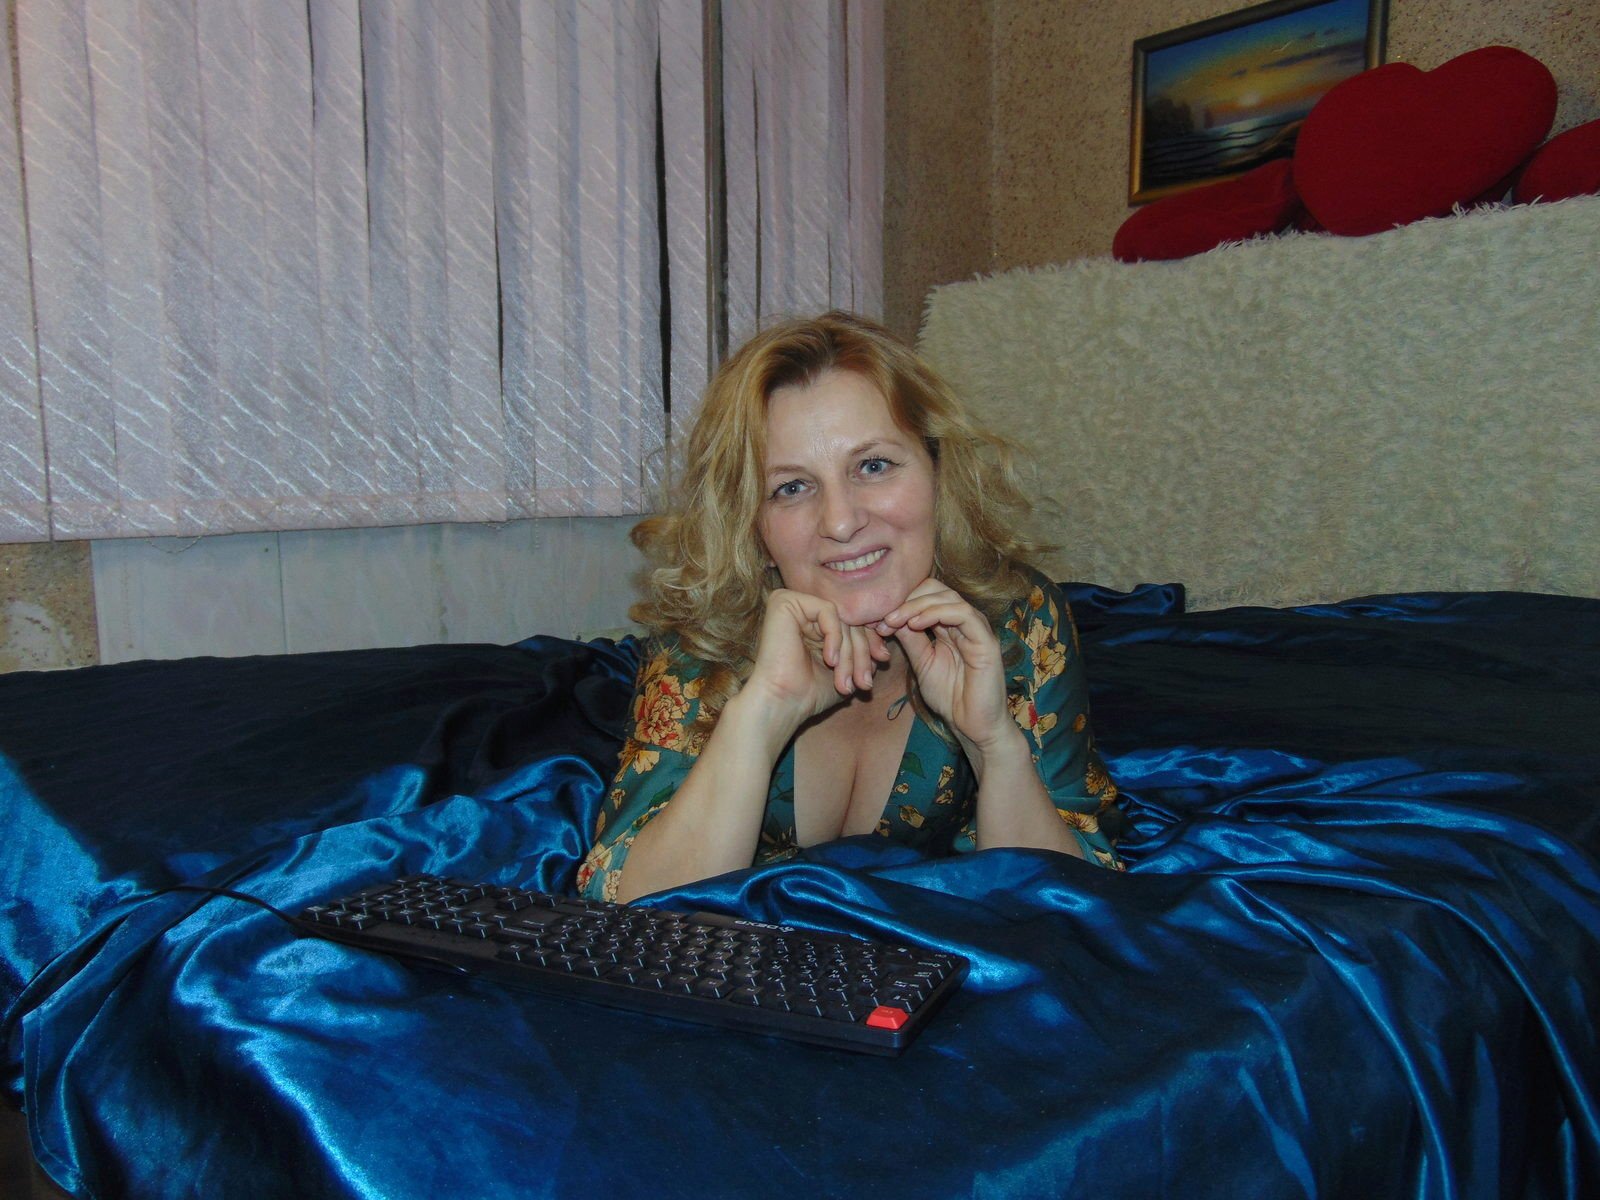 TianaHotMature - chat online exciting with this White Lady over 35 